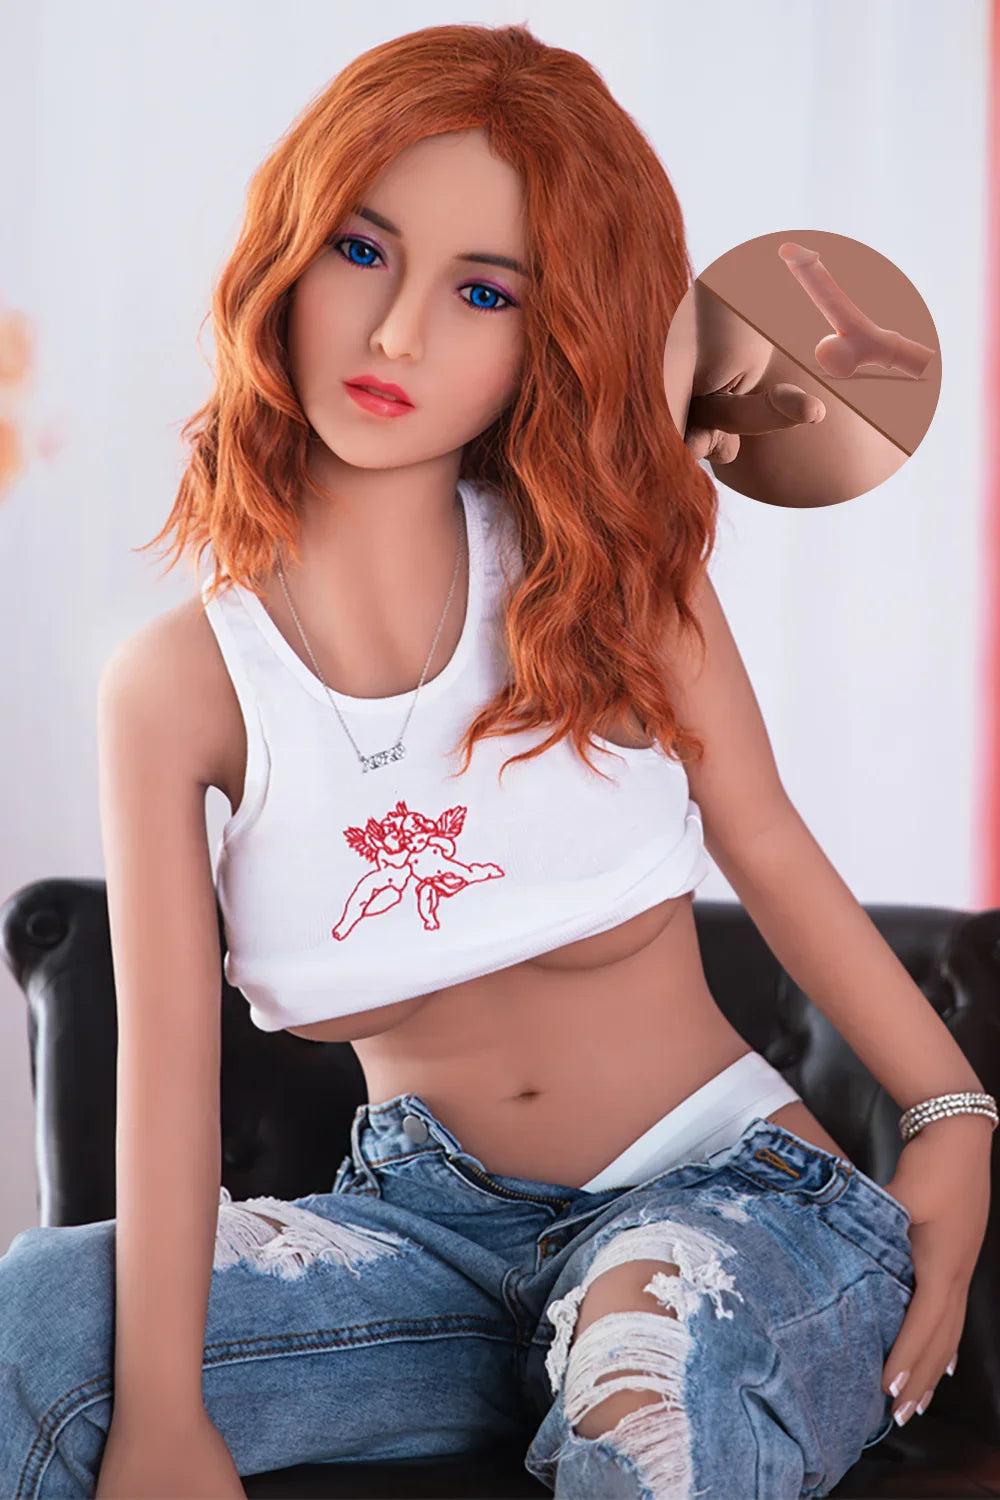 US Stock - Haven 150cm 187# Transgender TPE Sex Doll Nature Skin Sexy Real Lesbian Doll Adult Shemale Love Doll